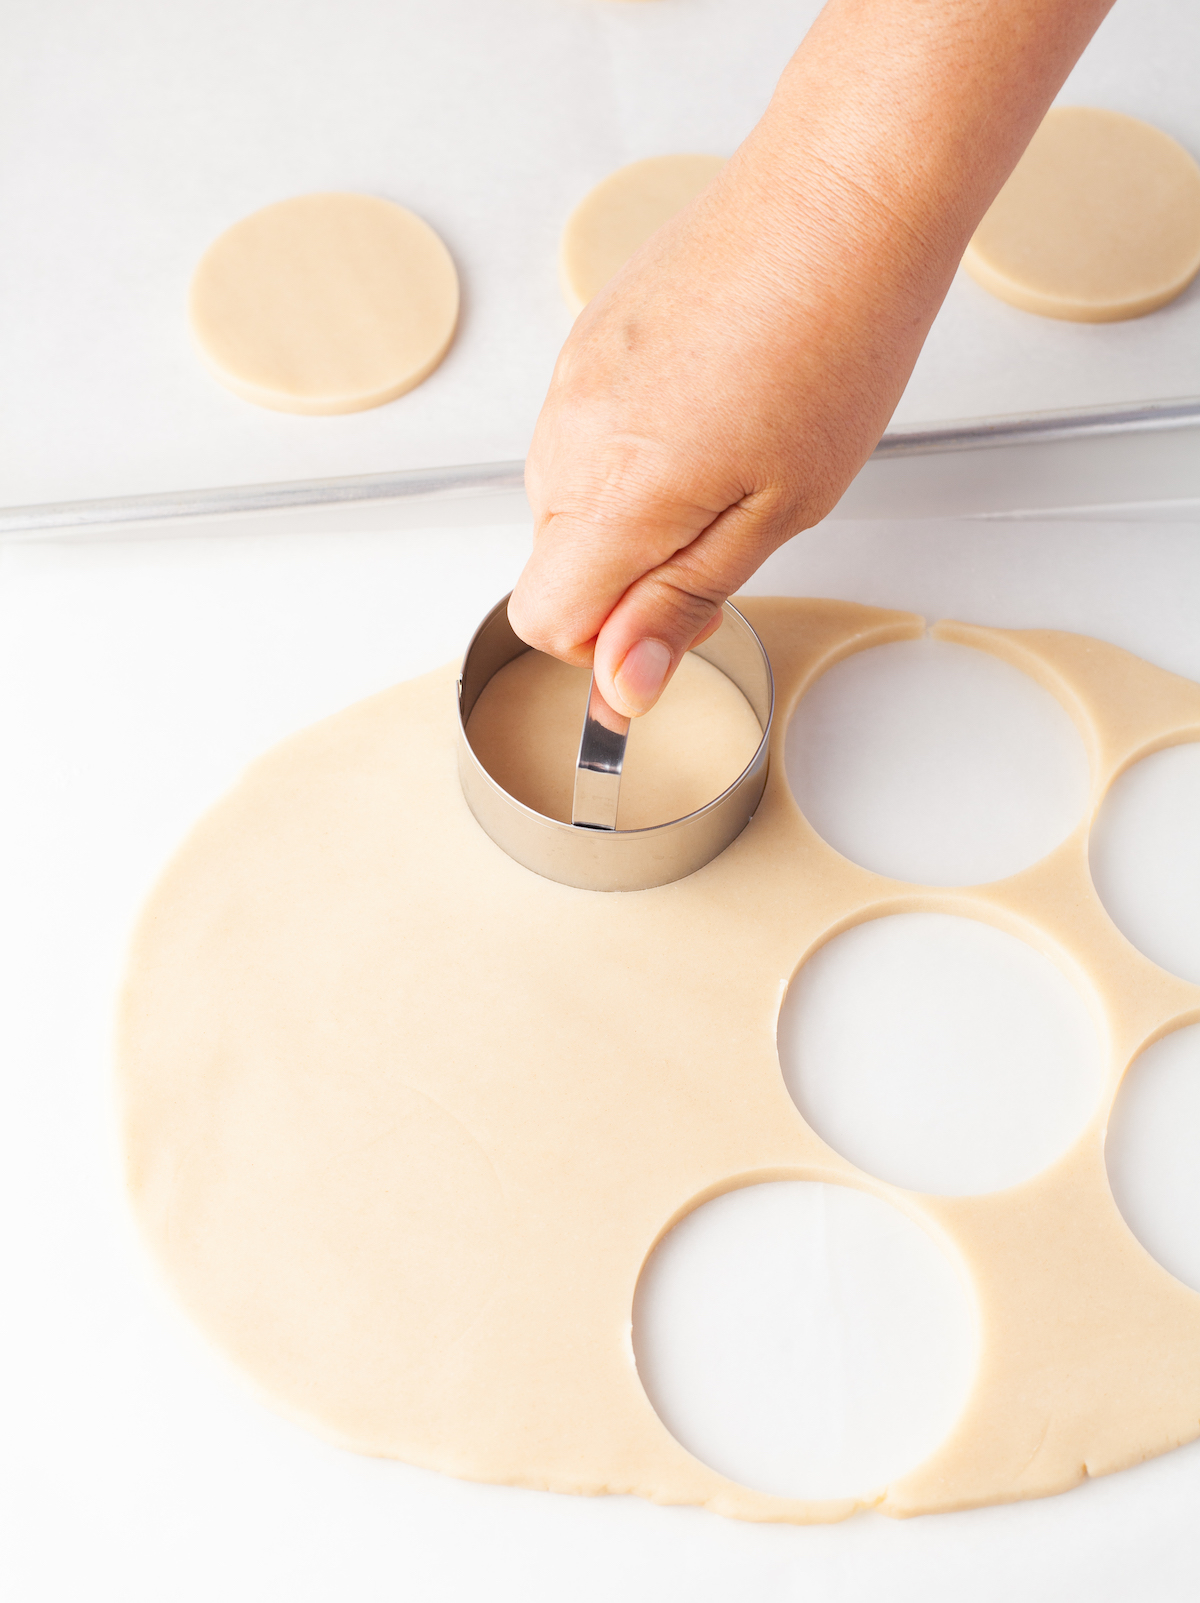 Hand cutting circles out of dough